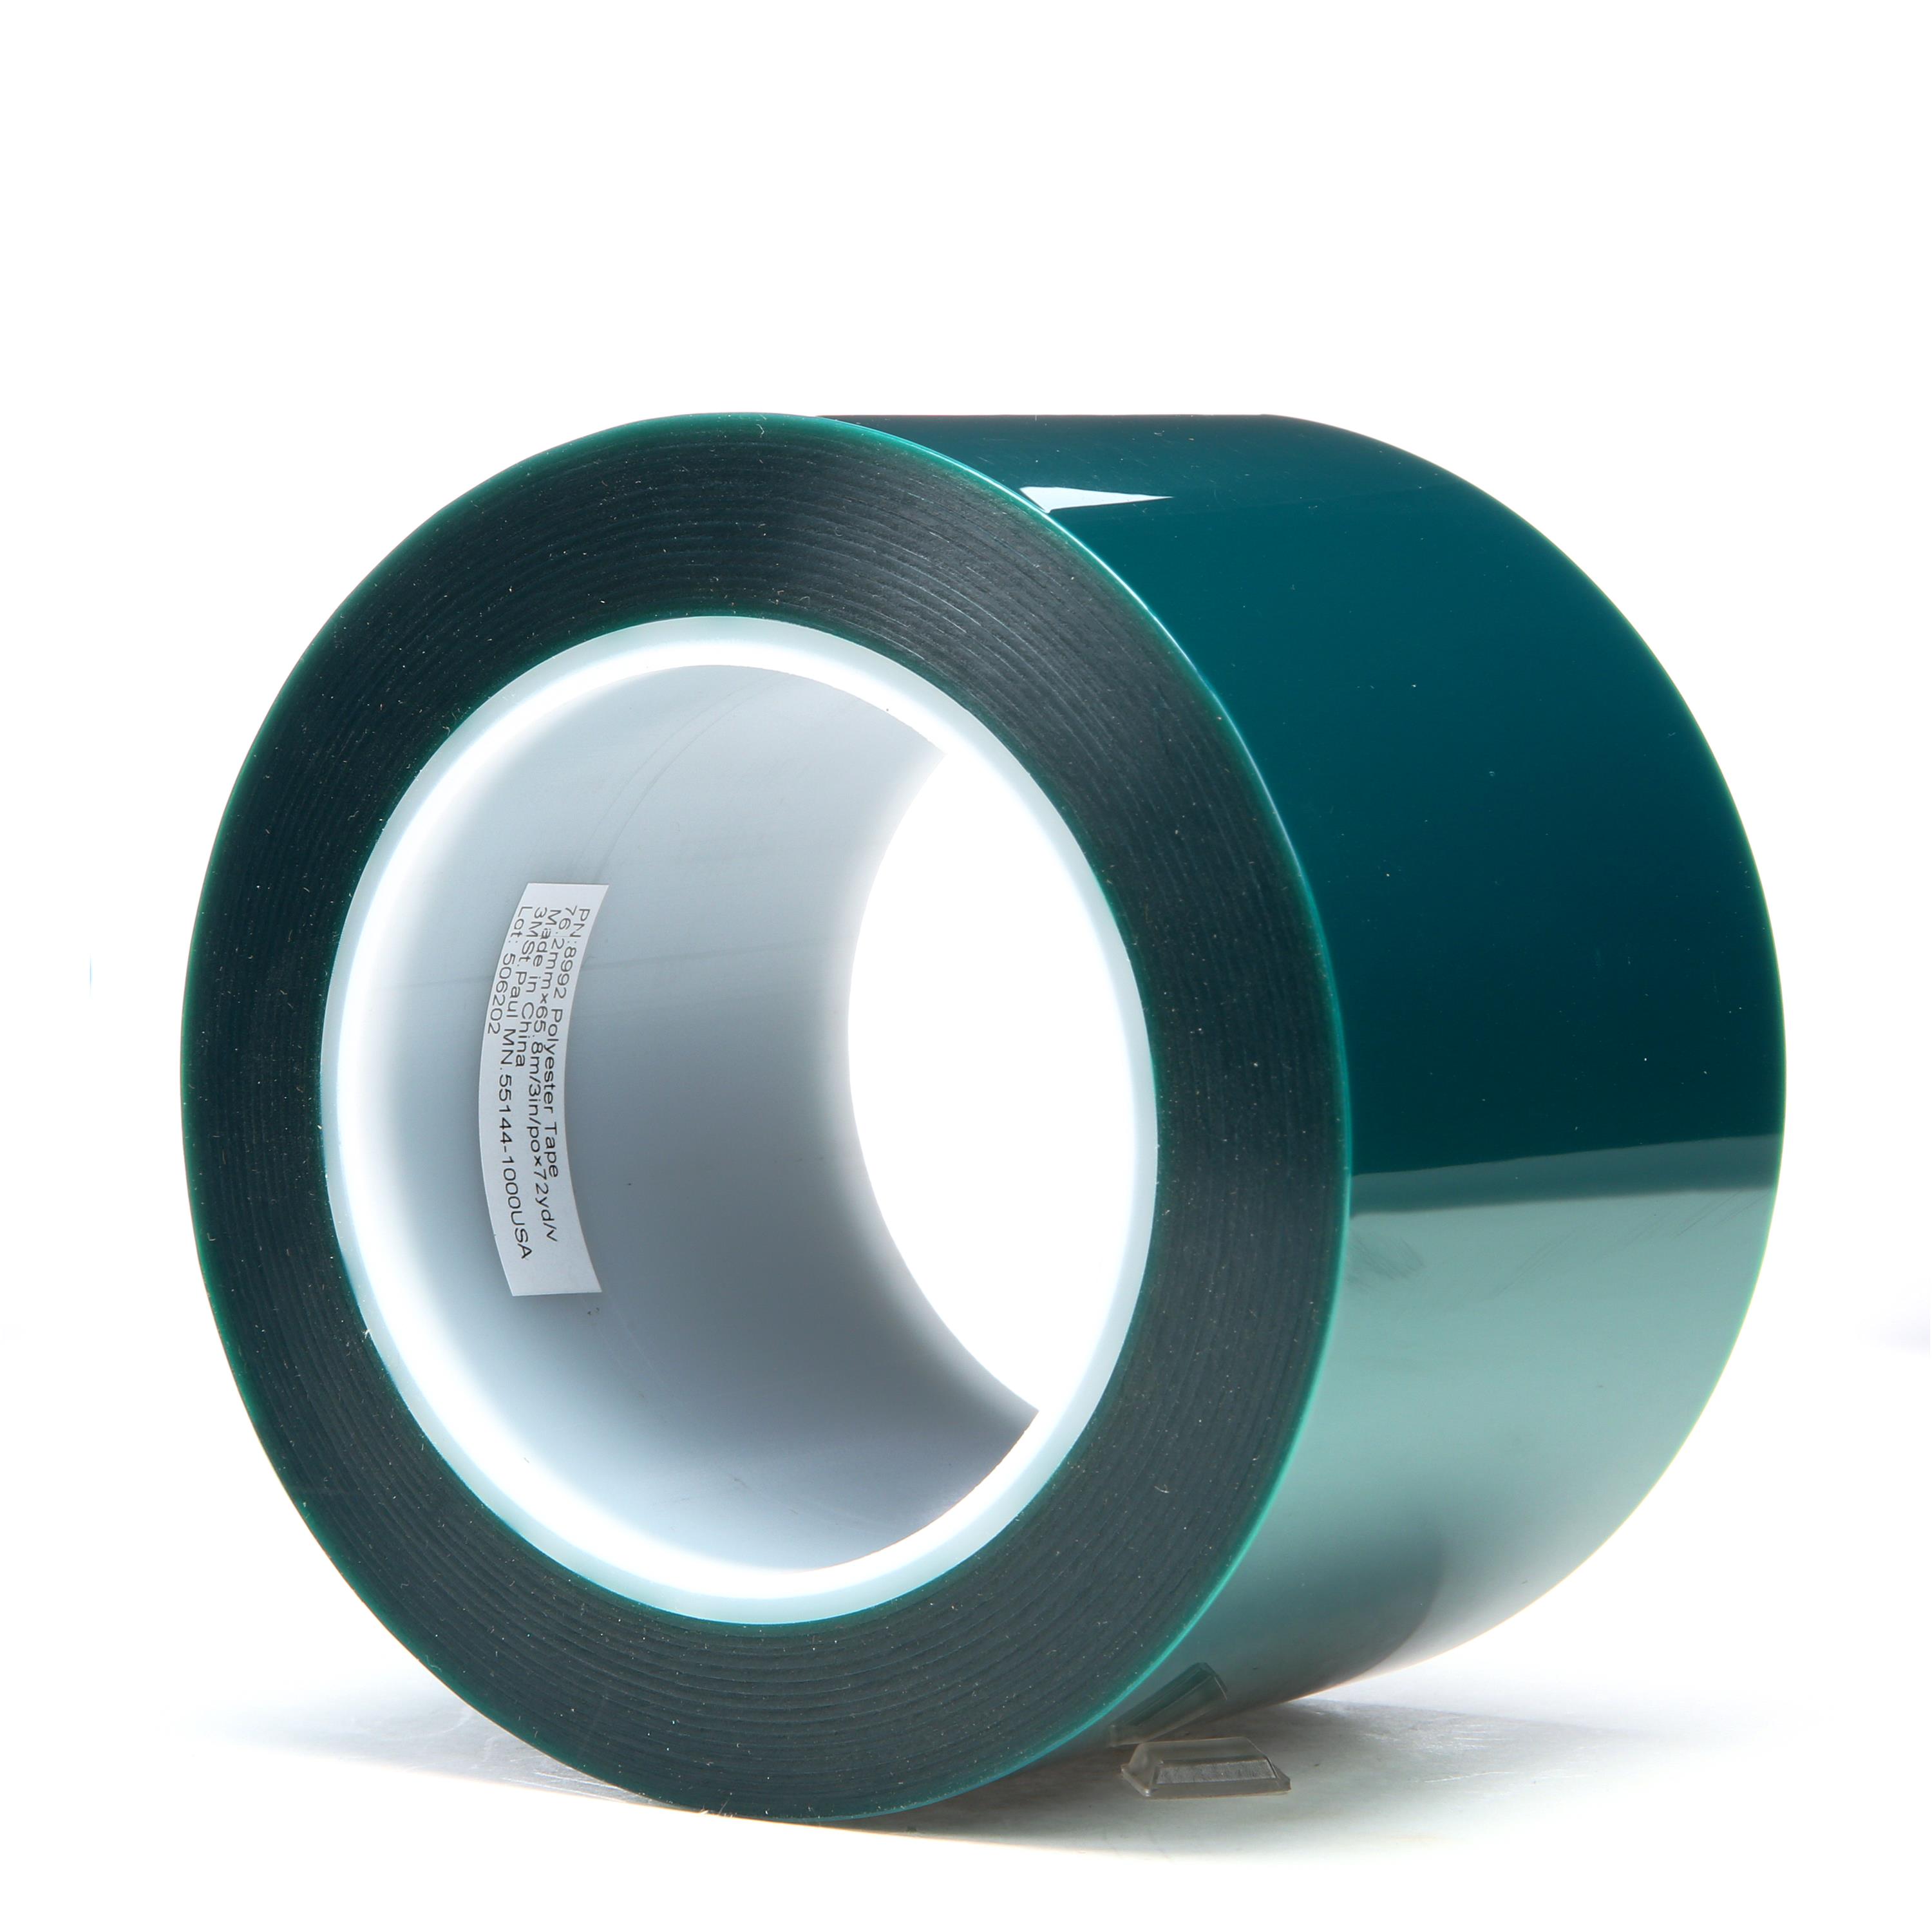 Part # 8992, 3M™ Polyester Tape On Converters, Inc.